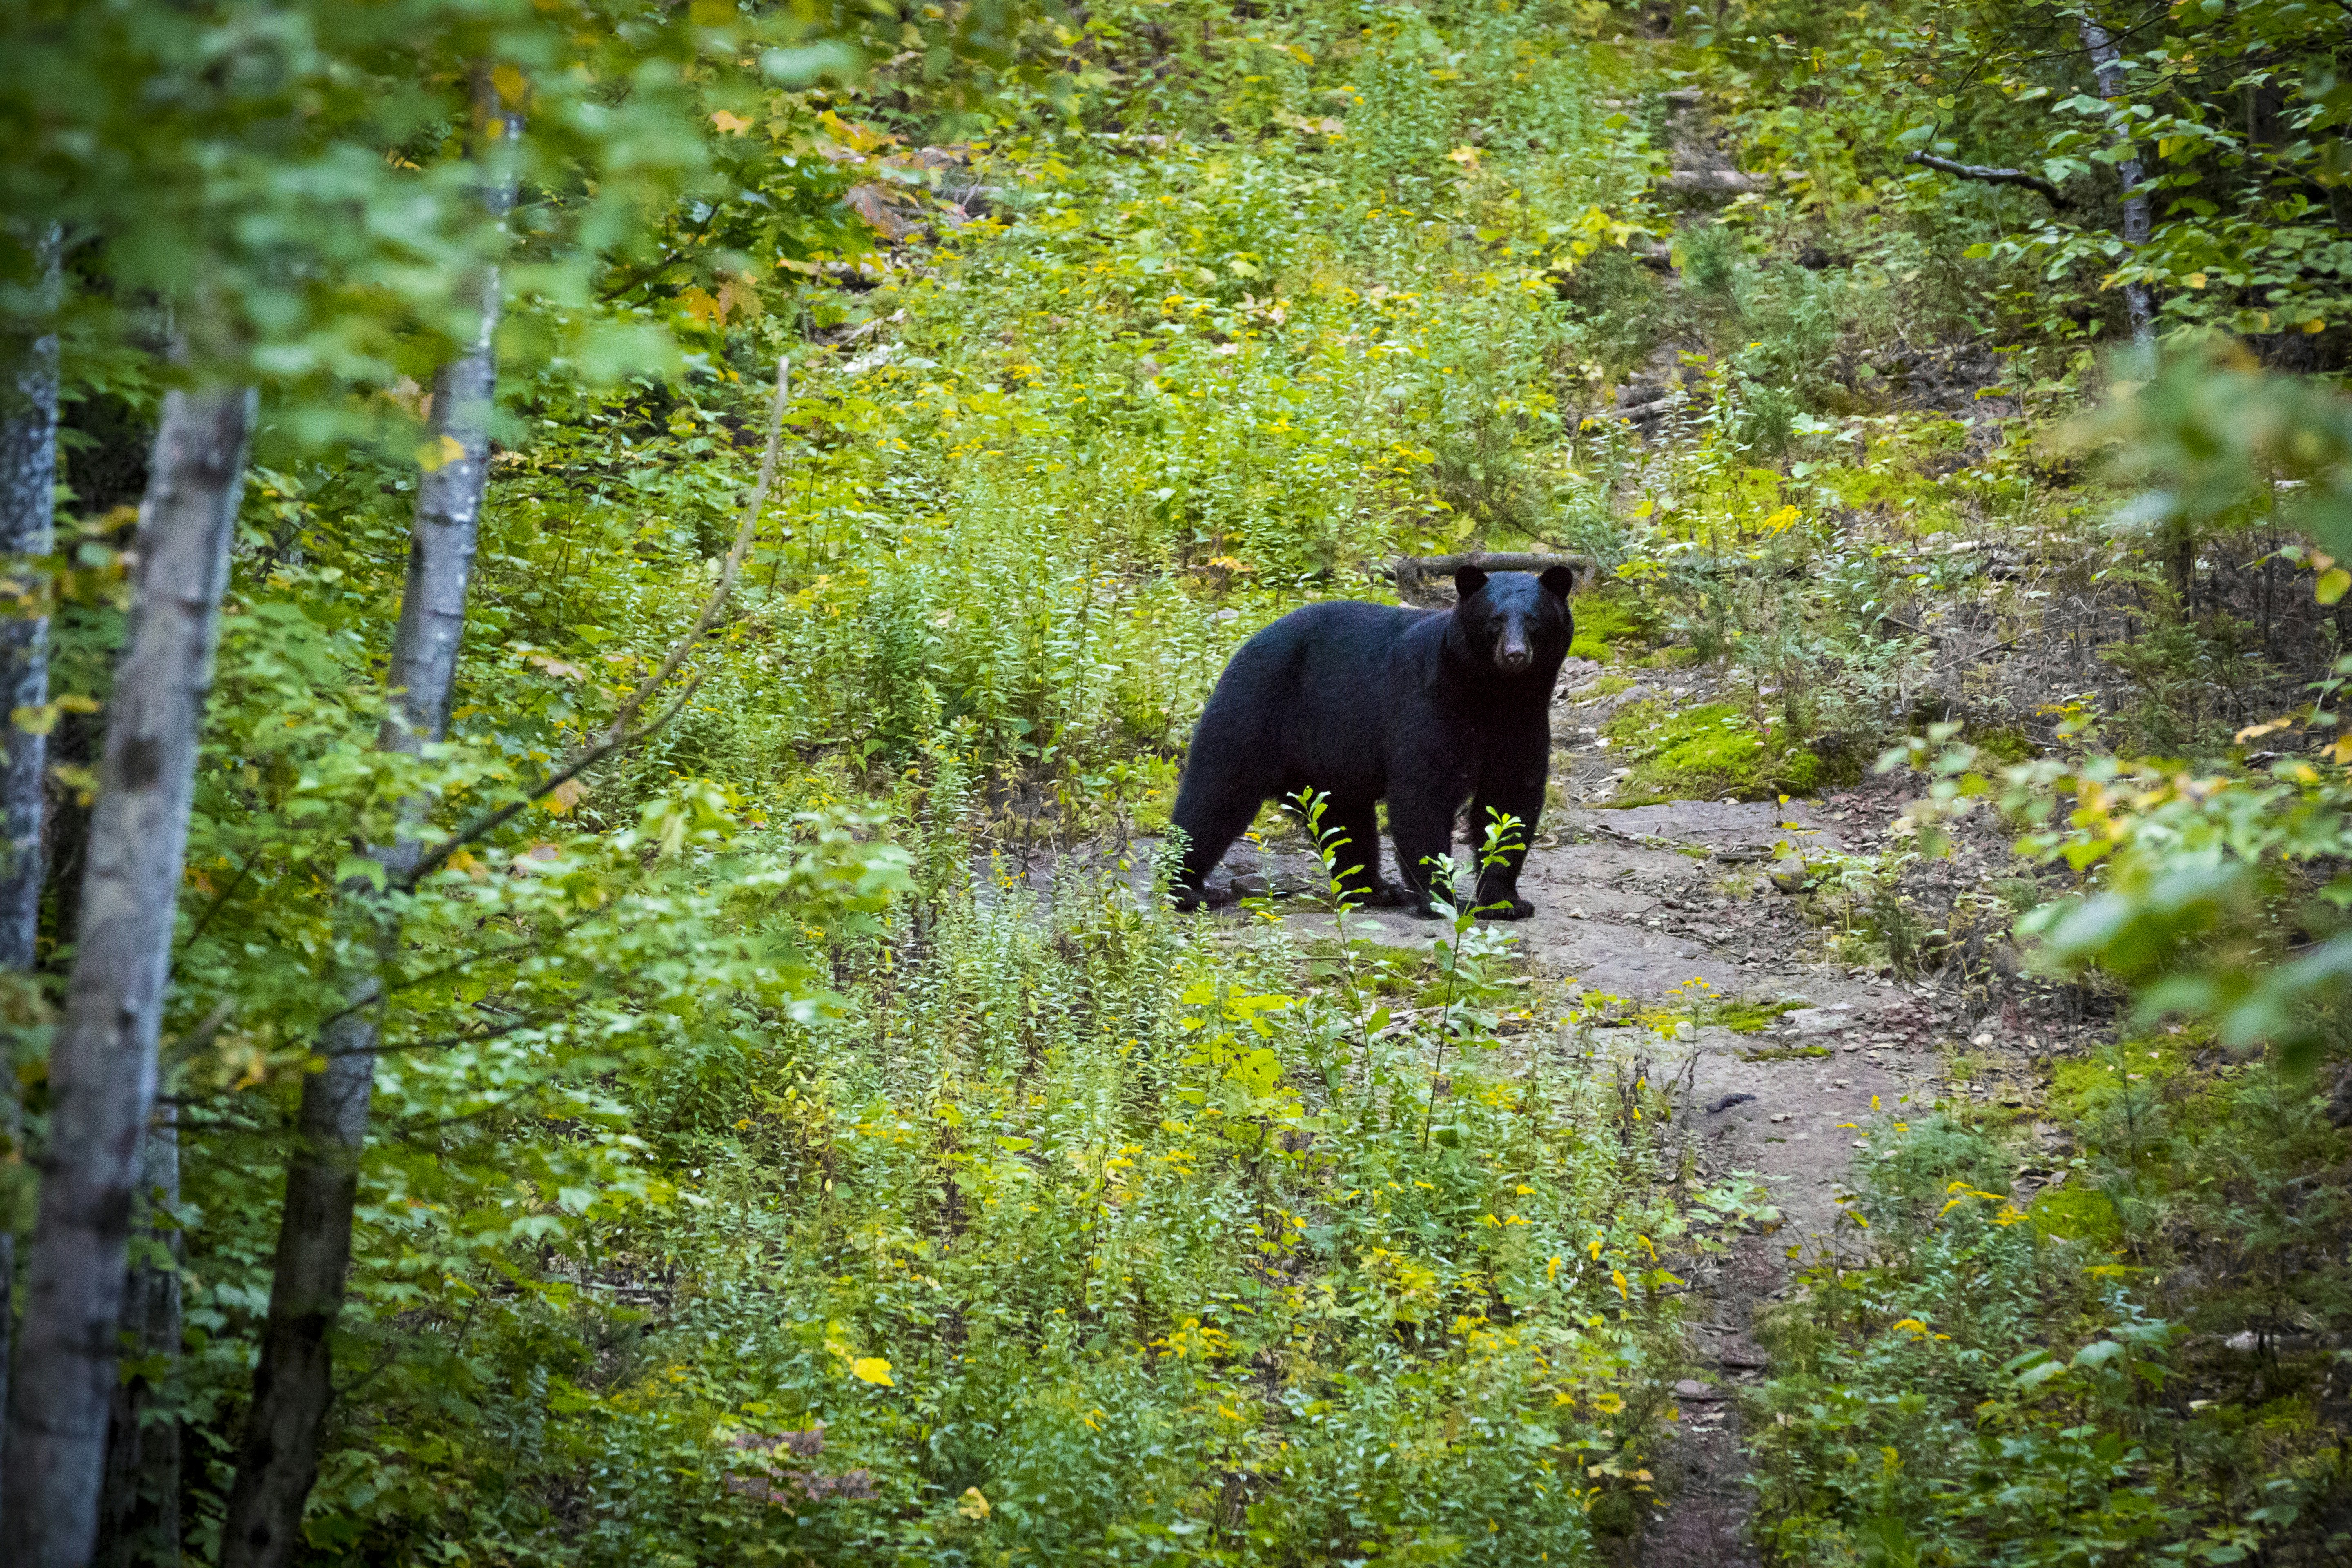 A black bear stands in a clearing of green forest in Quebec